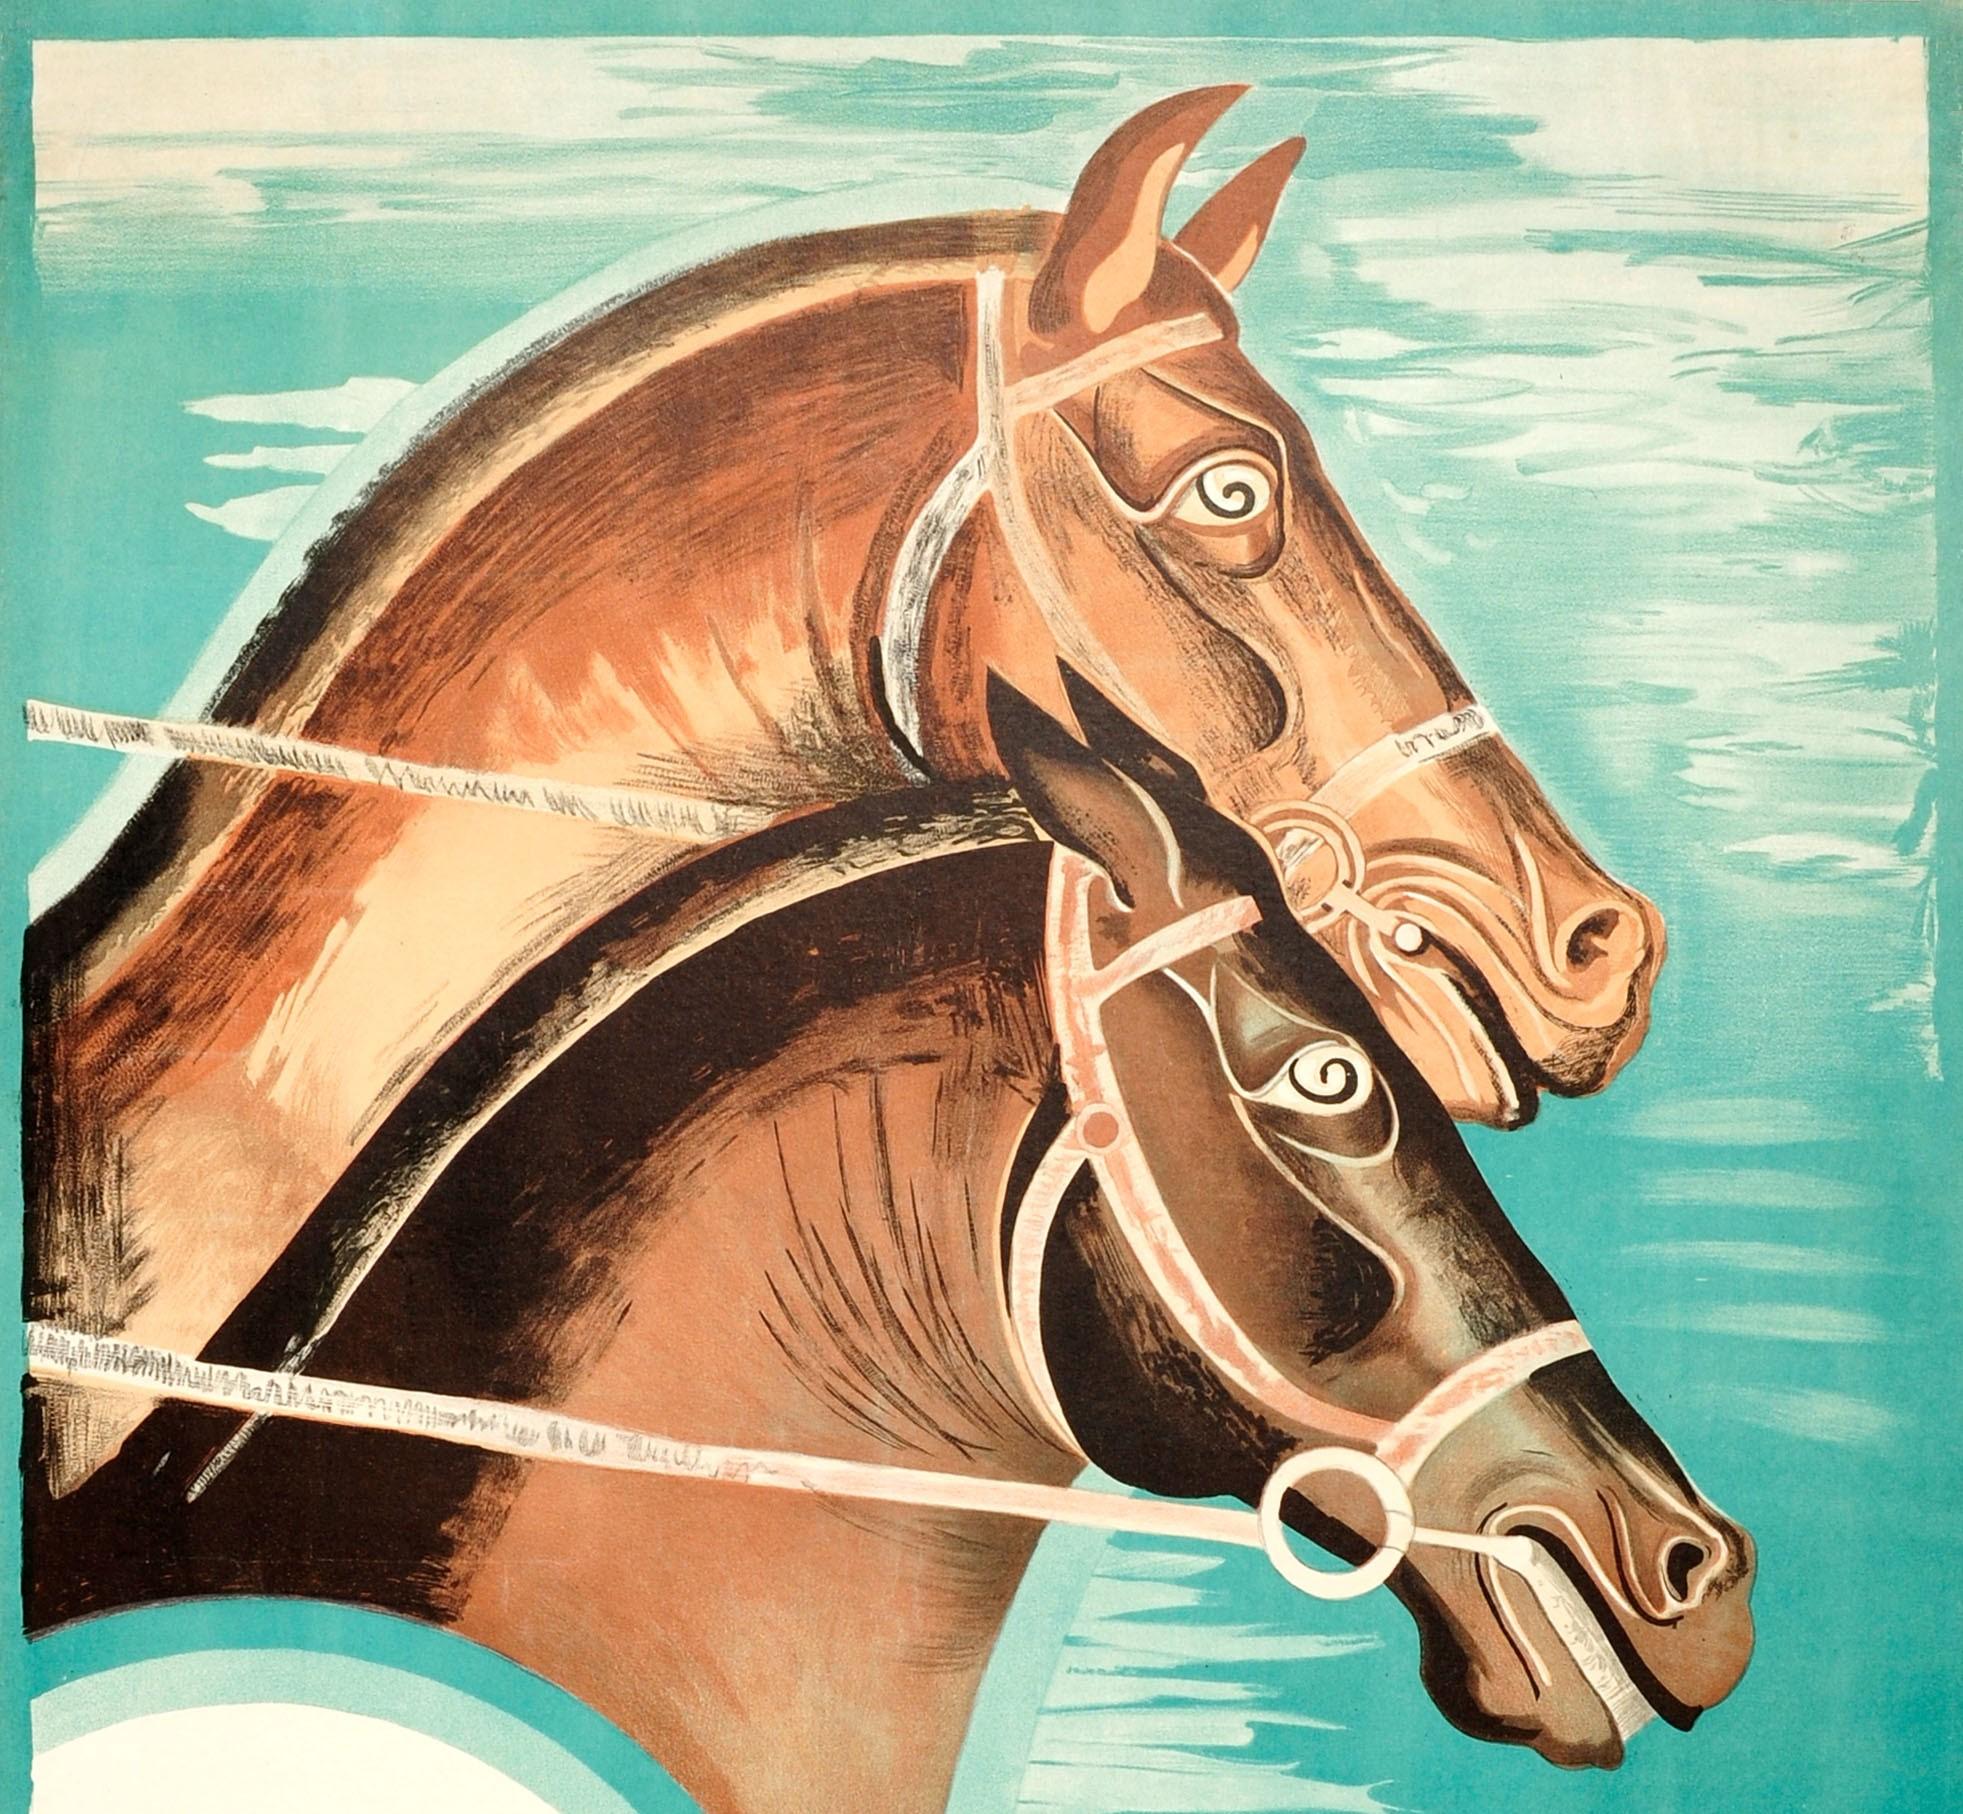 Original vintage sports poster issued by London Transport for the 1935 Epsom Horse Race - Epsom Spring Meeting April 20 21 and 22 Buses every 2 minutes from Morden Station to the Racecourse - featuring a stunning Art Deco image of two horses against